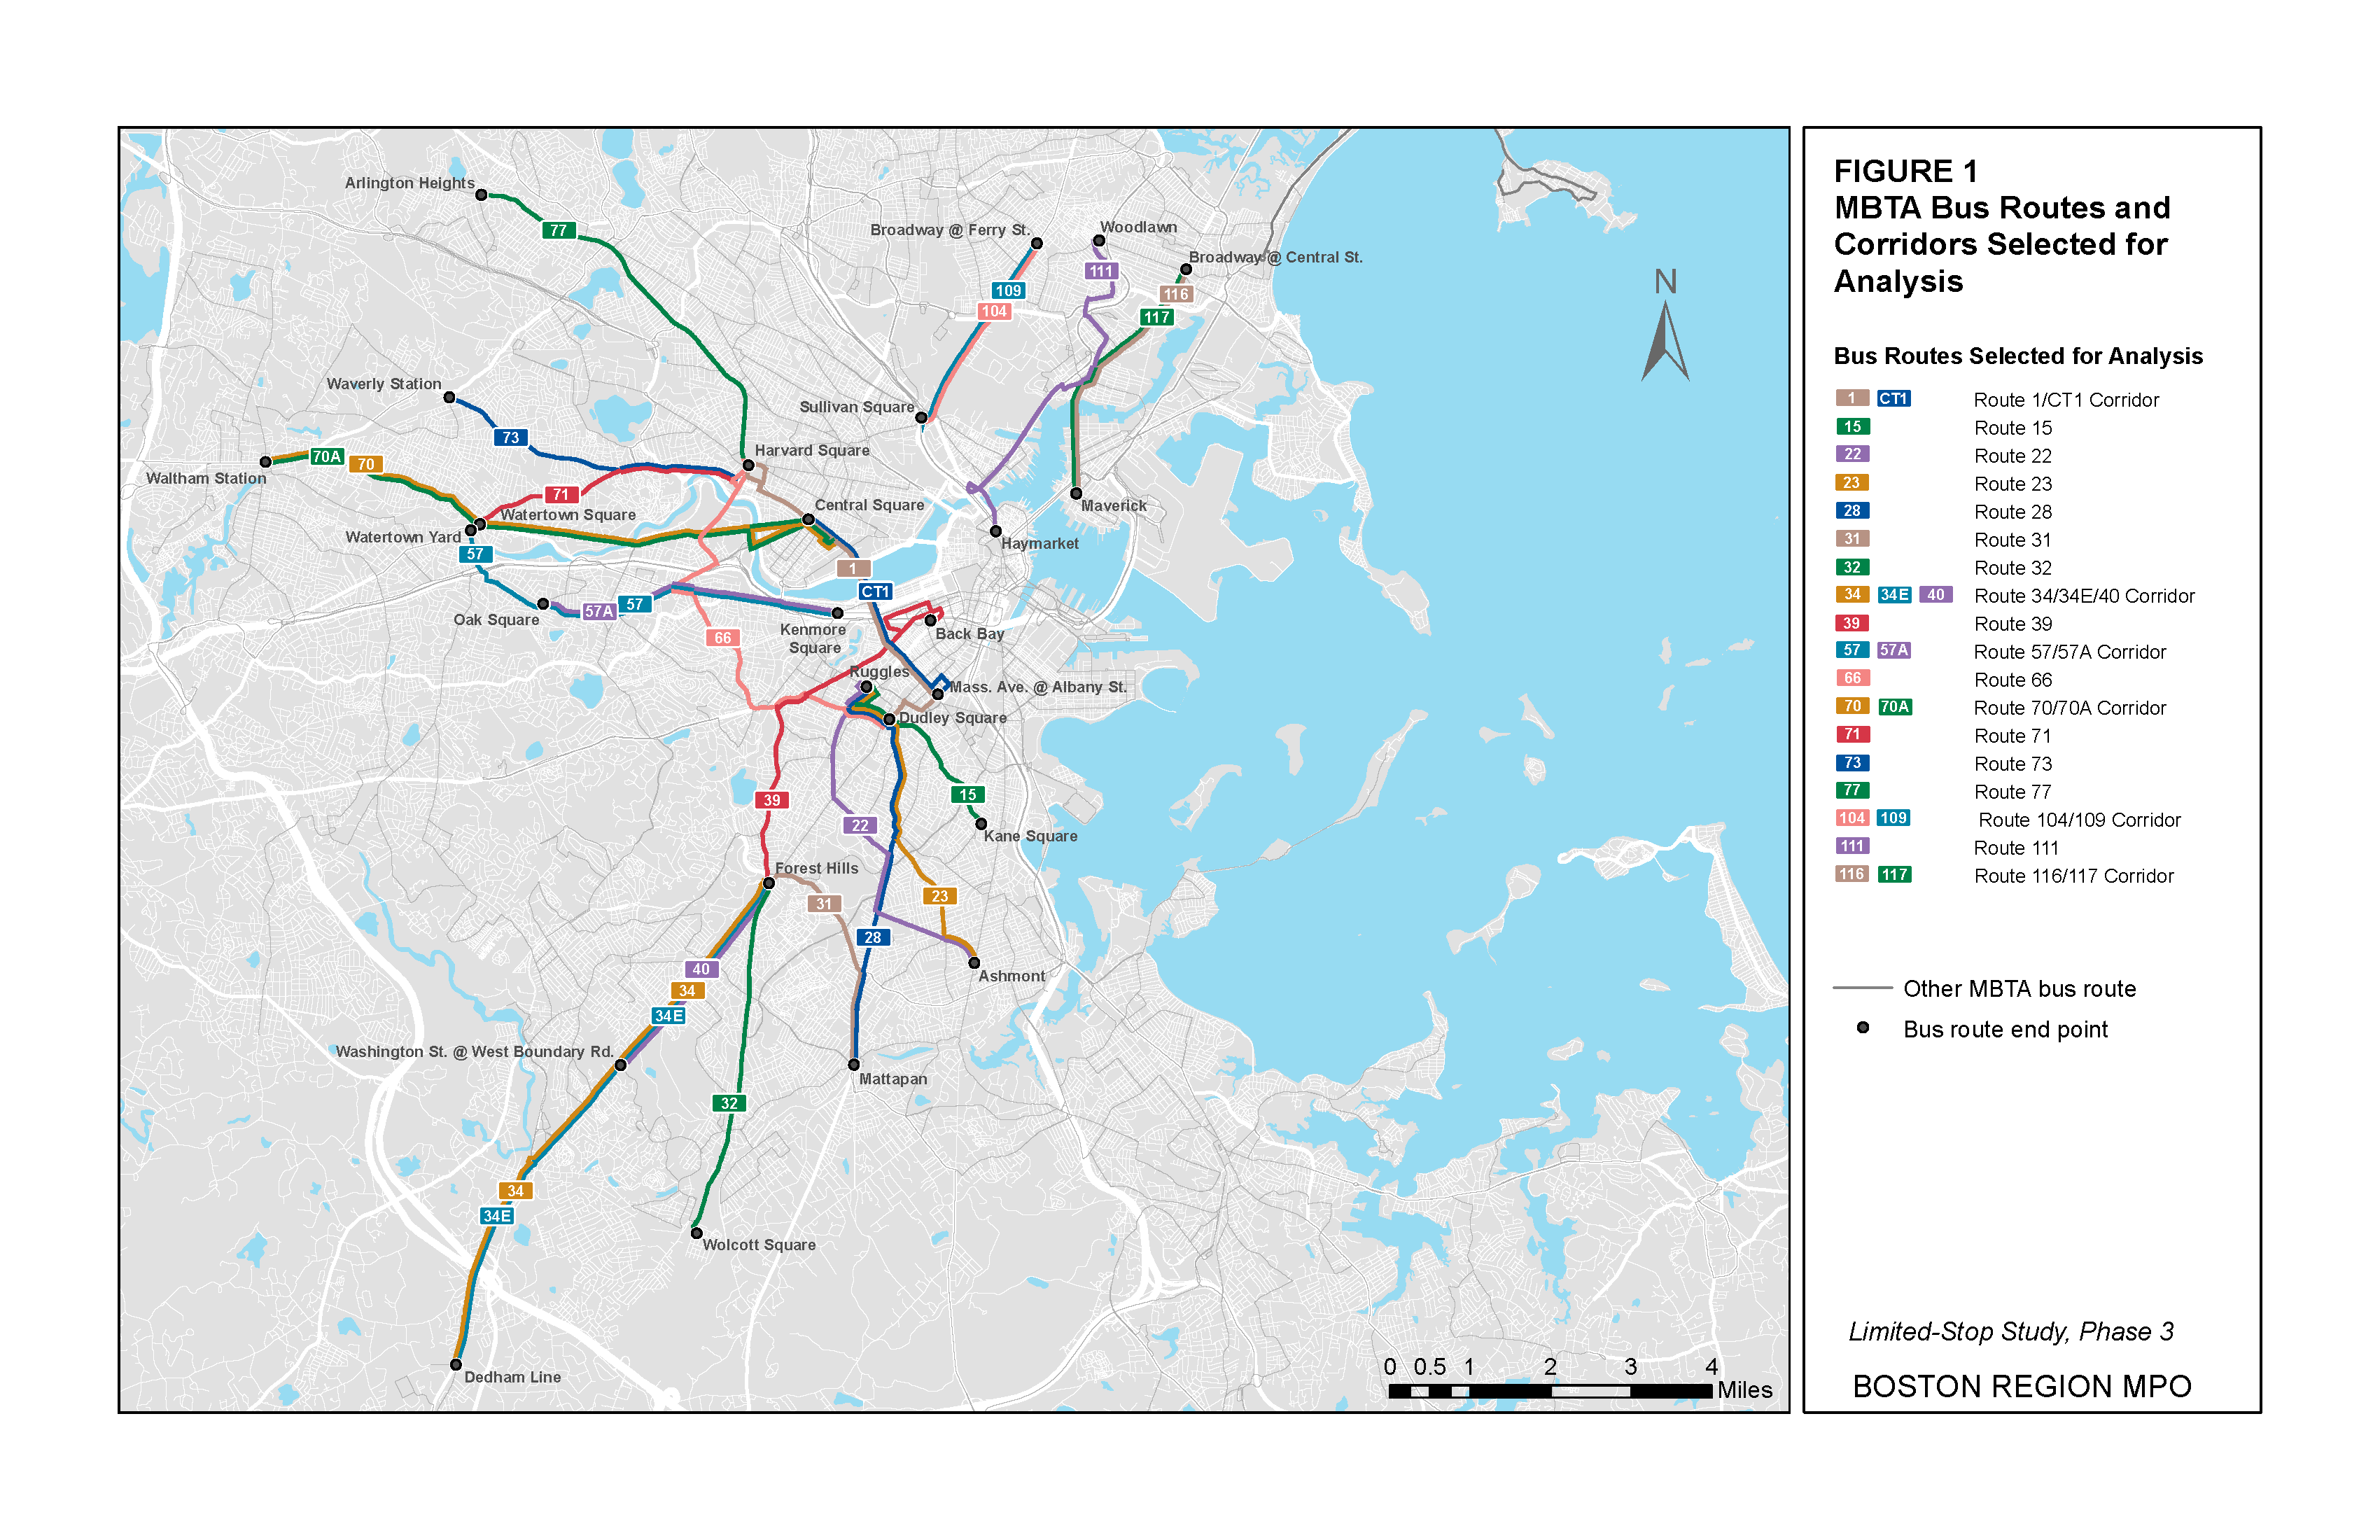 Figure 1. MBTA Bus Routes and Corridors Selected for Analysis. This figure is a map of the selected local MBTA routes and corridors selected for evaluation of limited-stop service potential: bus Routes 15, 22, 23, 28, 31, 32, 39, 66, 77, and 111, trackless trolley Routes 71 and 73, and corridors in which Routes 34/34E/40, 57/57A, 70/70A, 104/109, and 116/117 operate.